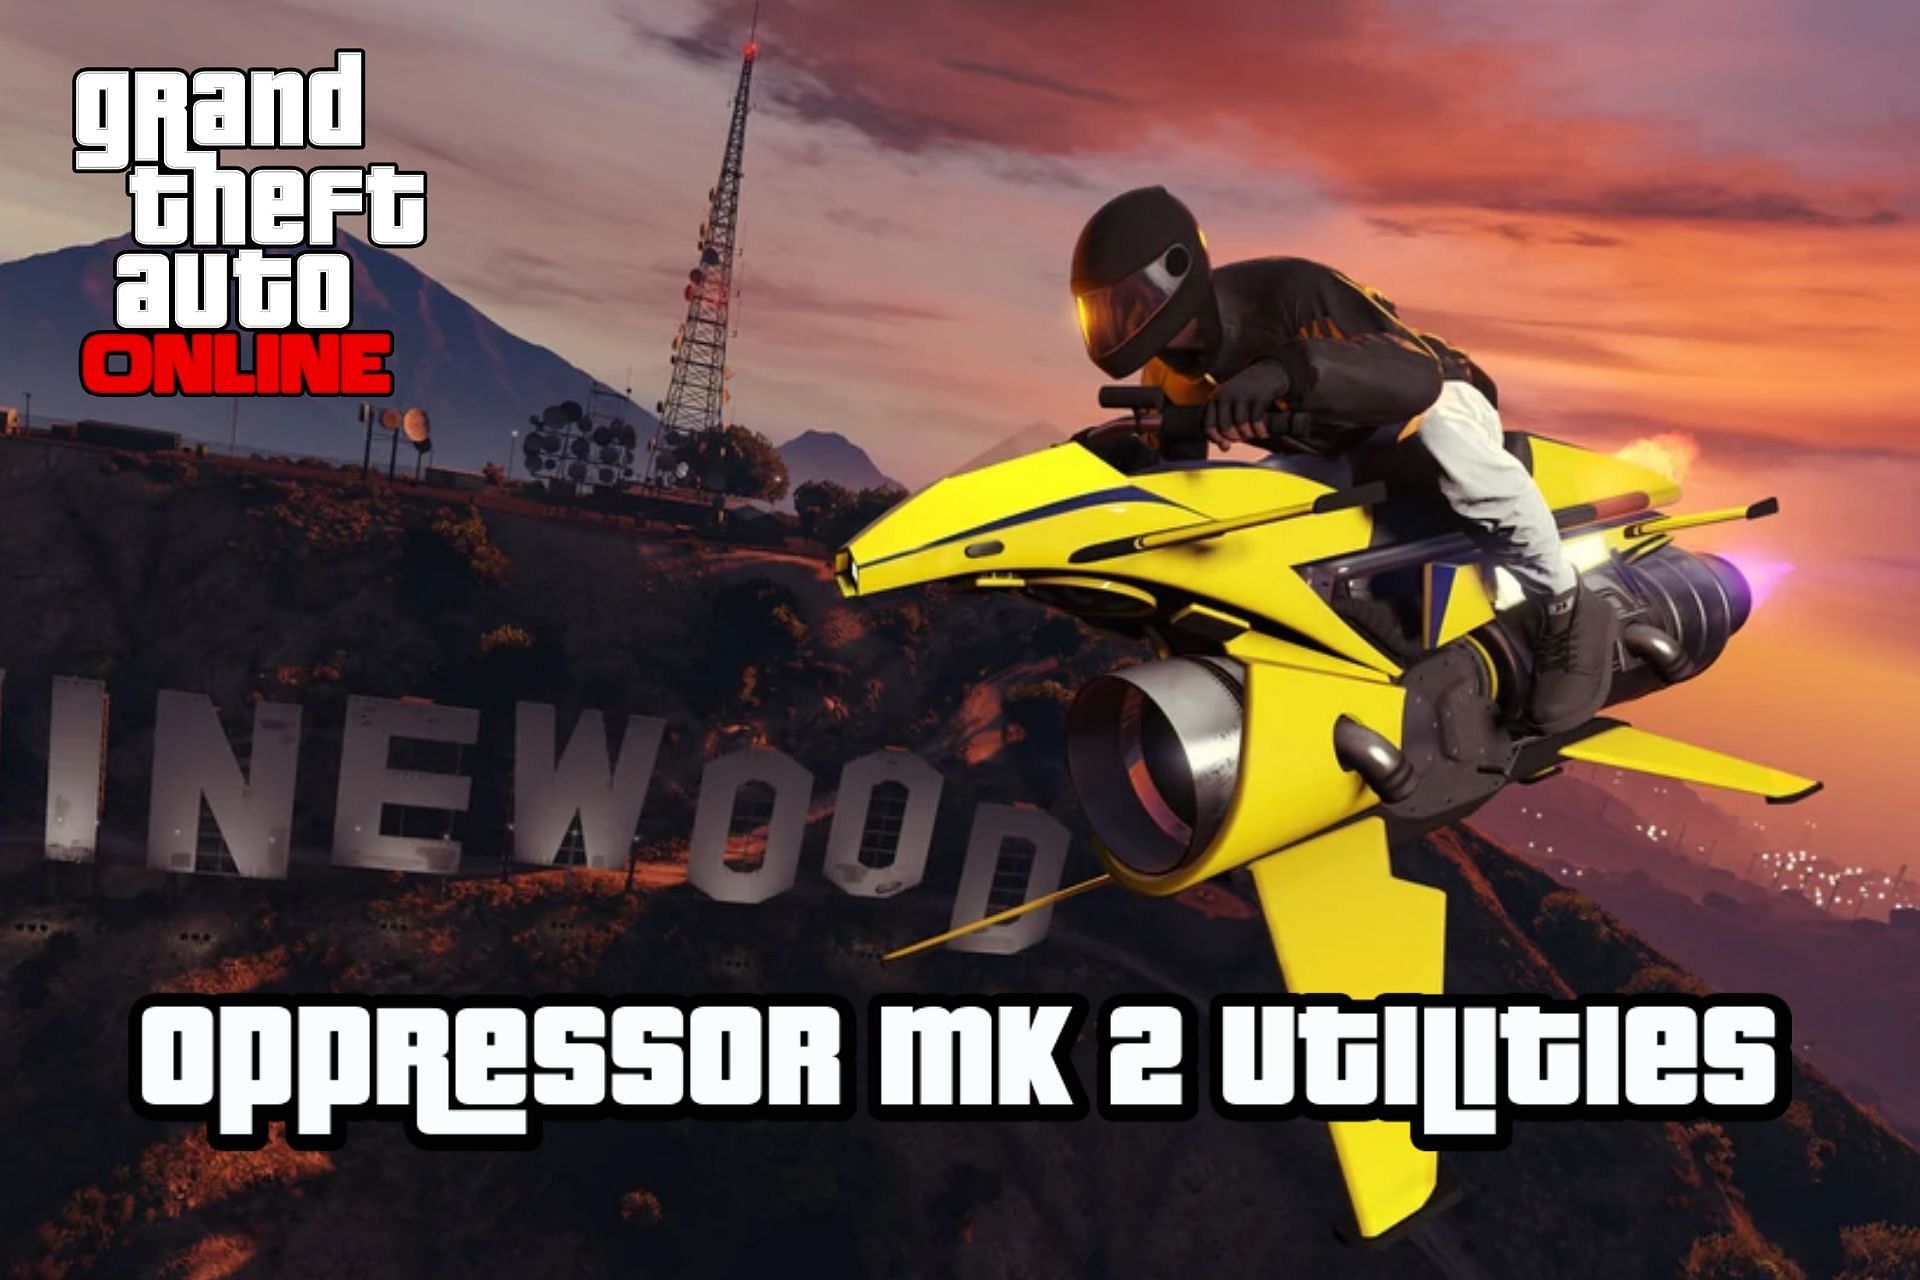 The Oppressor MK 2 is one of the most useful vehicles in GTA Online (Image via Rockstar Games)